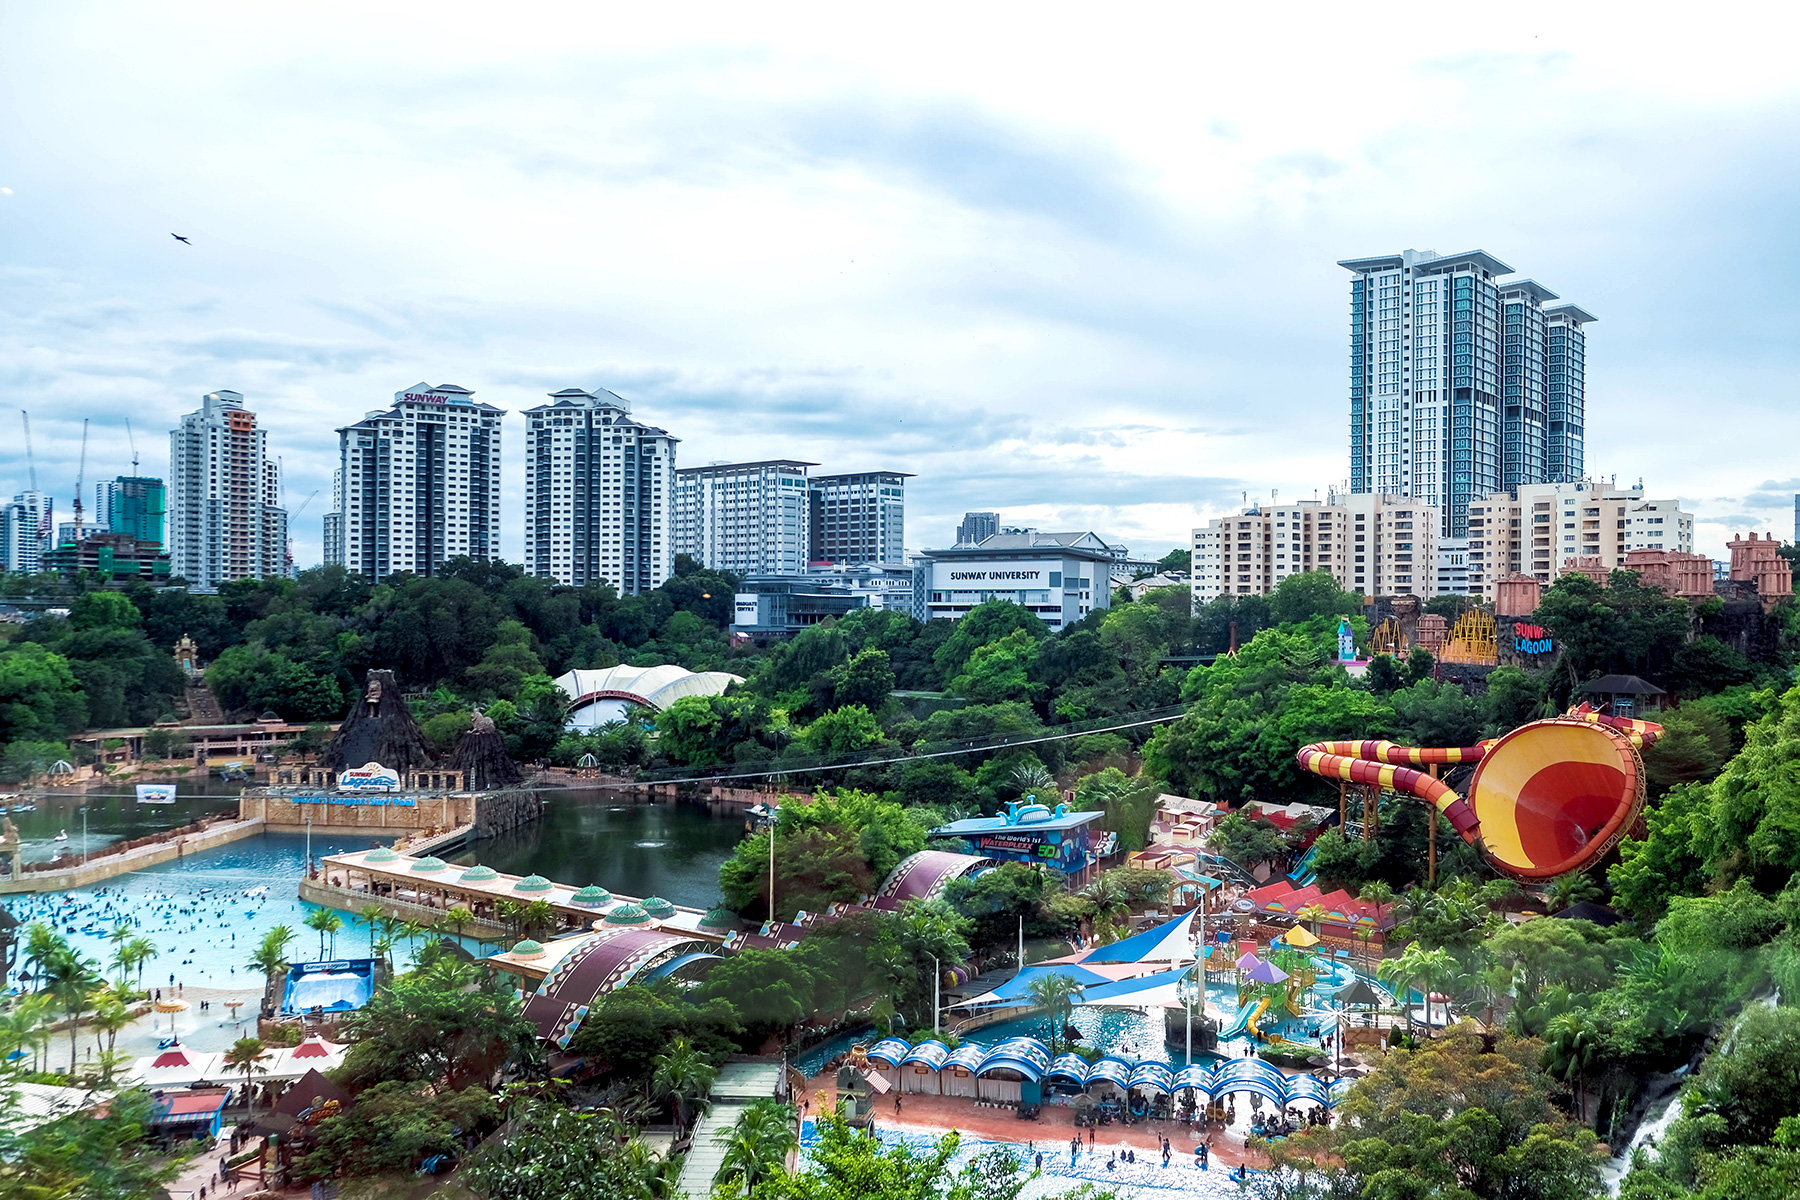 With a view this good, you don’t want to miss out on the fun they have in store – exclusively at Sunway Lagoon!